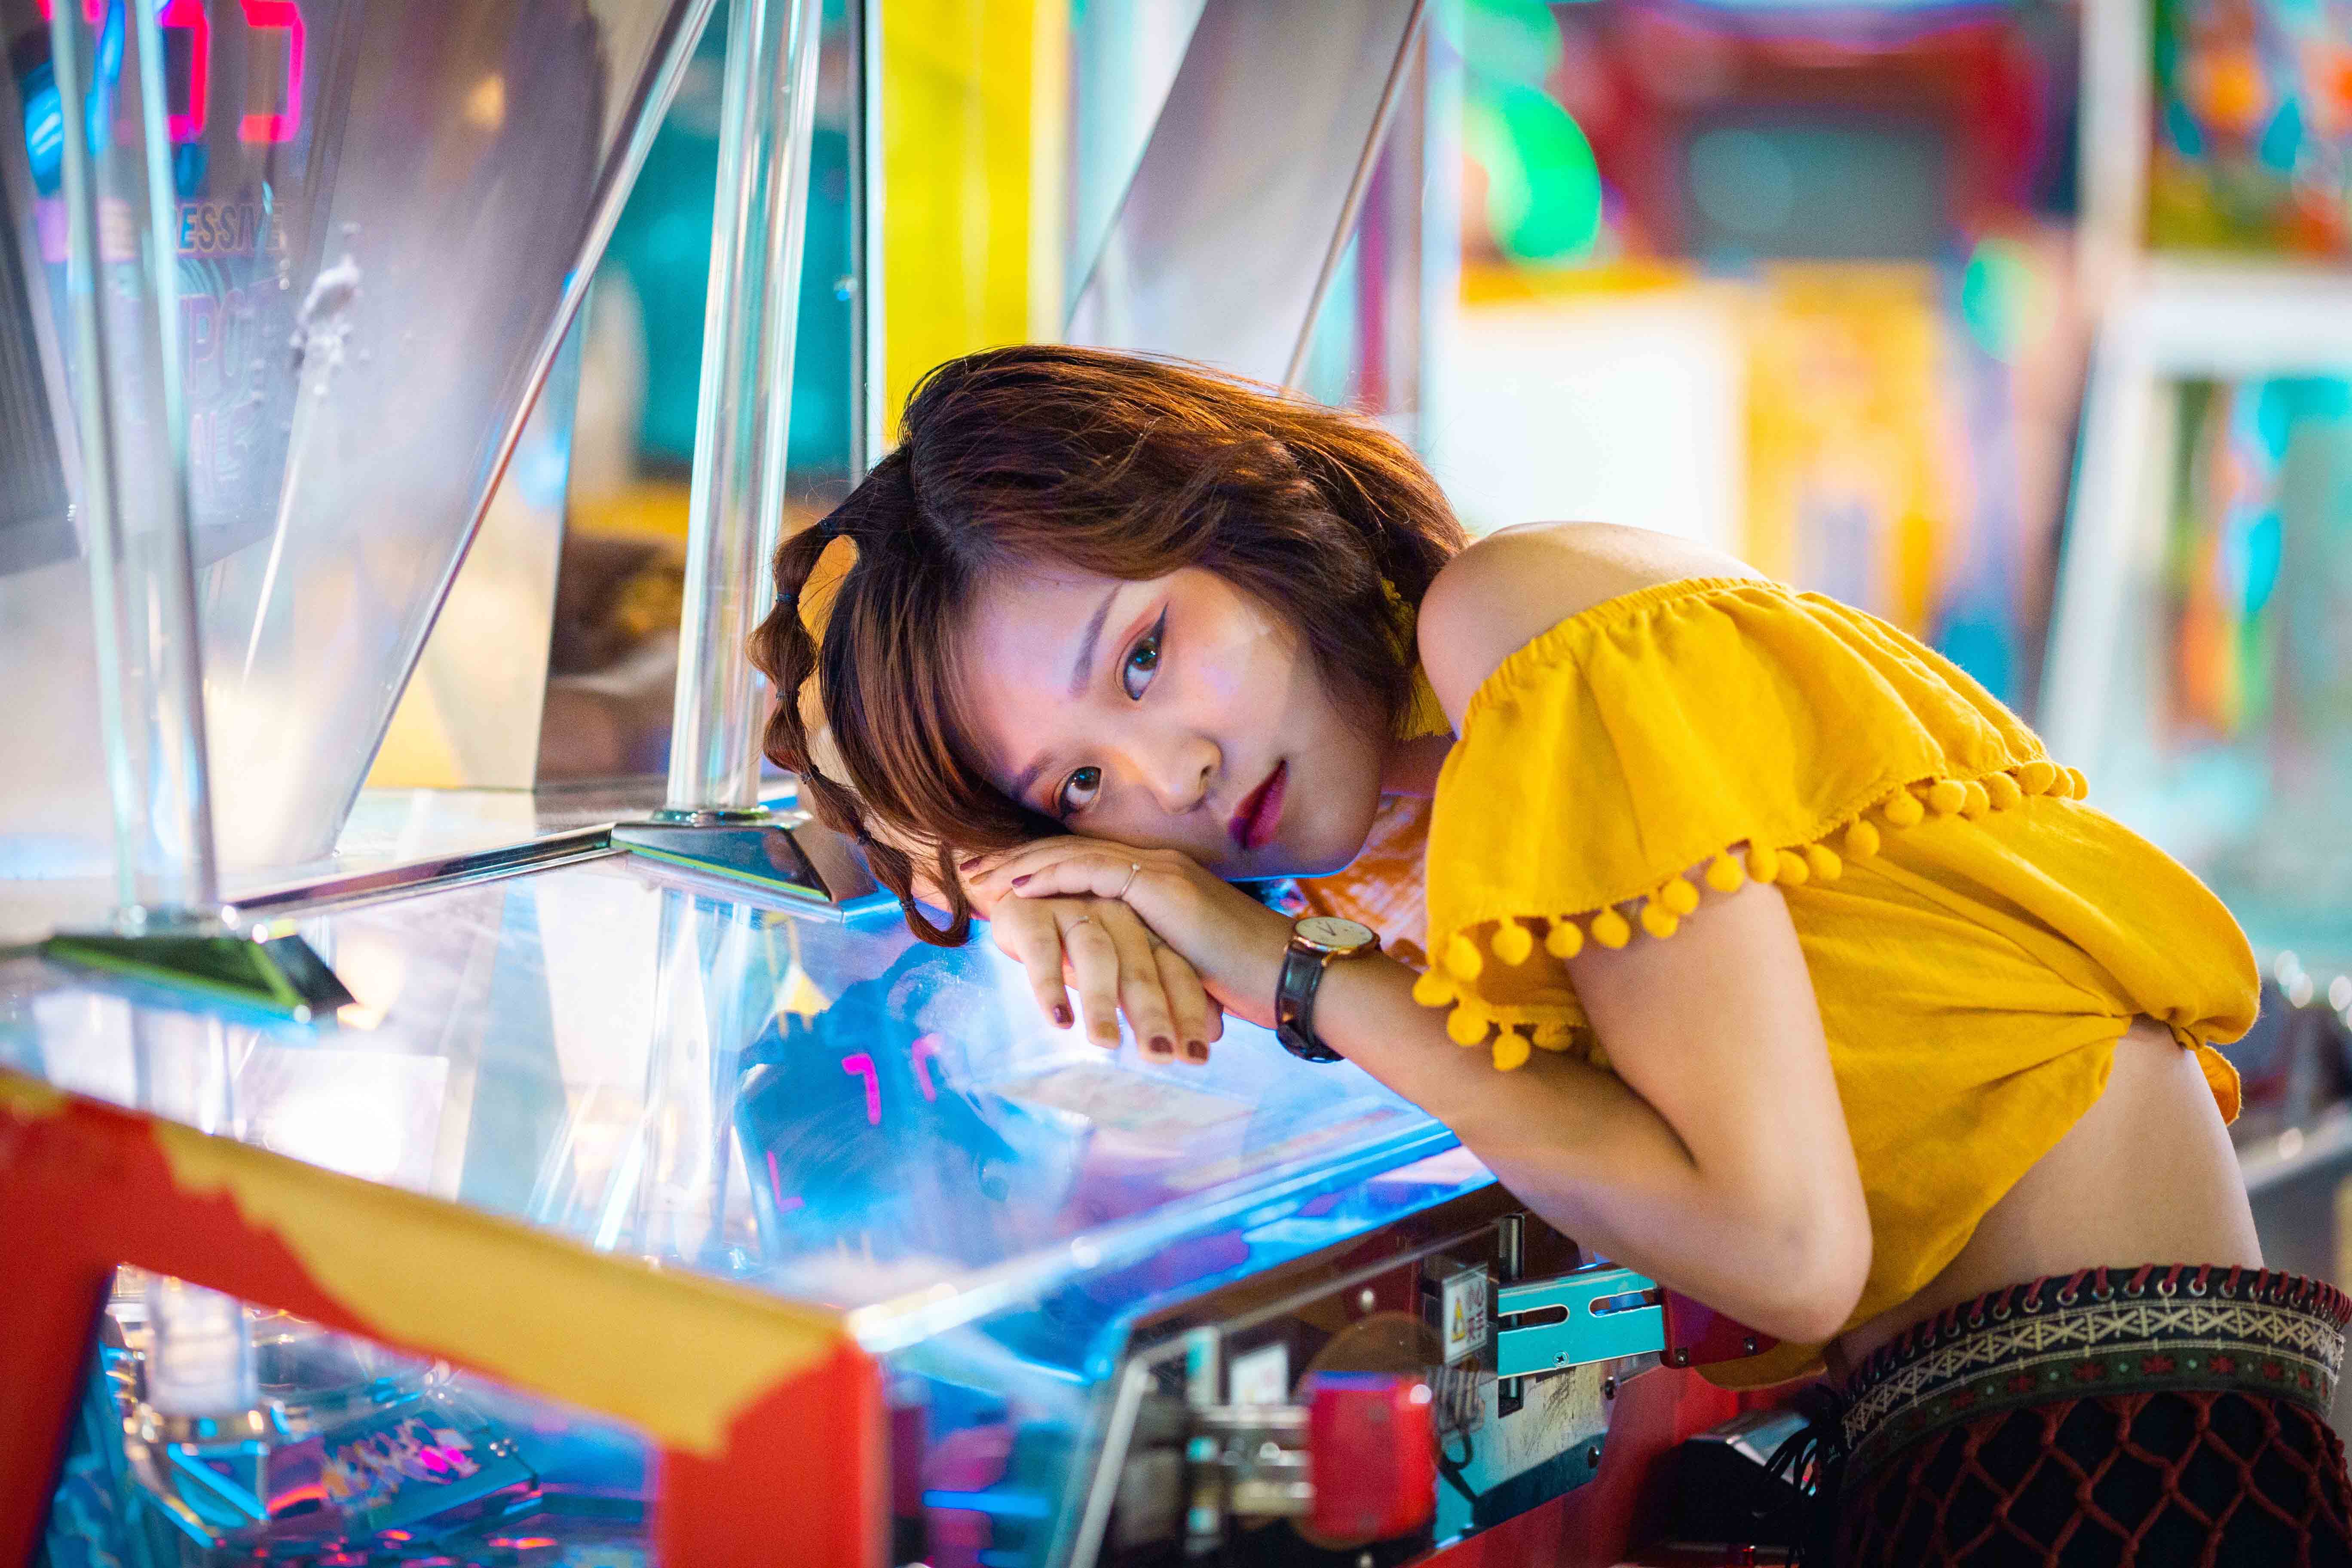  A photo of a woman in a yellow top, leaning on an arcade machine